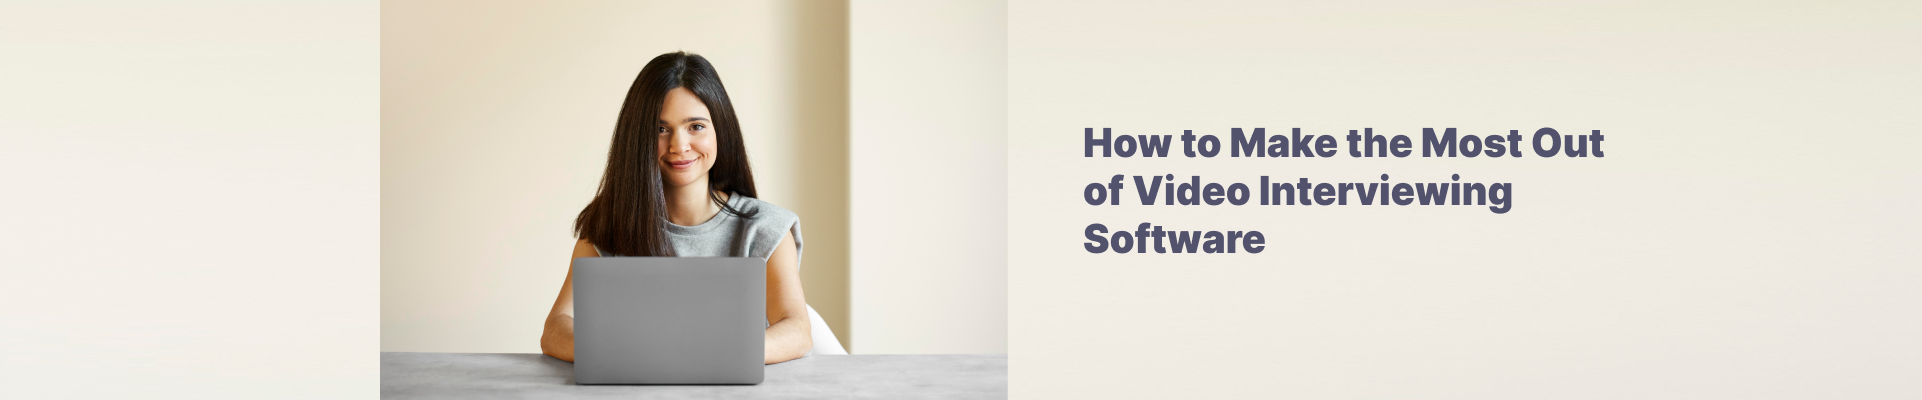 How to Make the Most Out of Video Interviewing Software